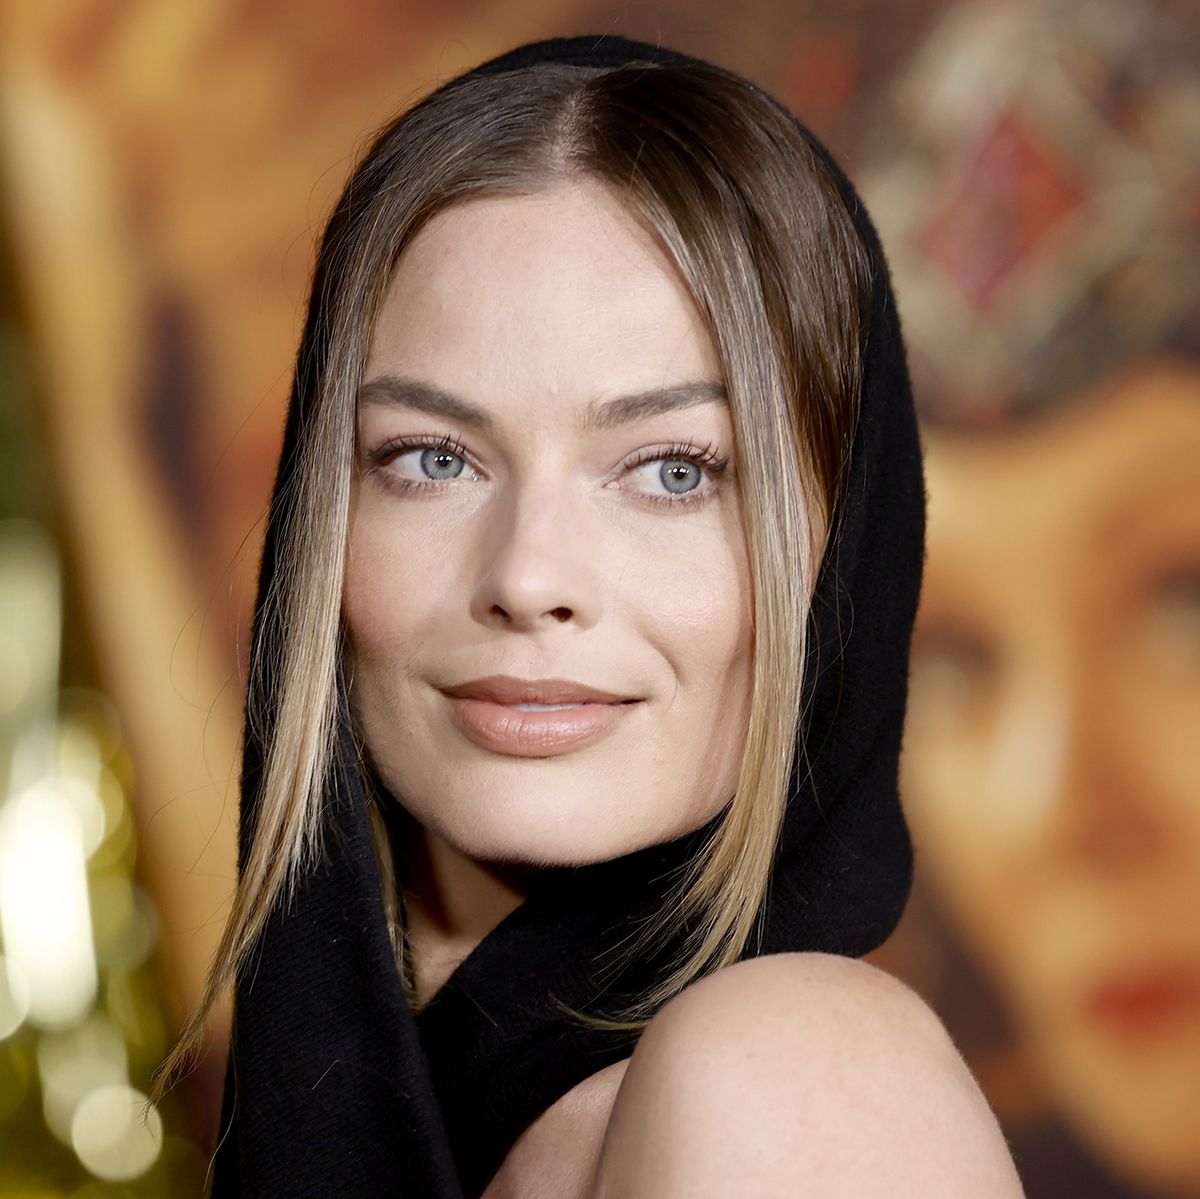 Margot Robbie Has Epic Abs & Legs In Cut-Out Wrap Dress Pics